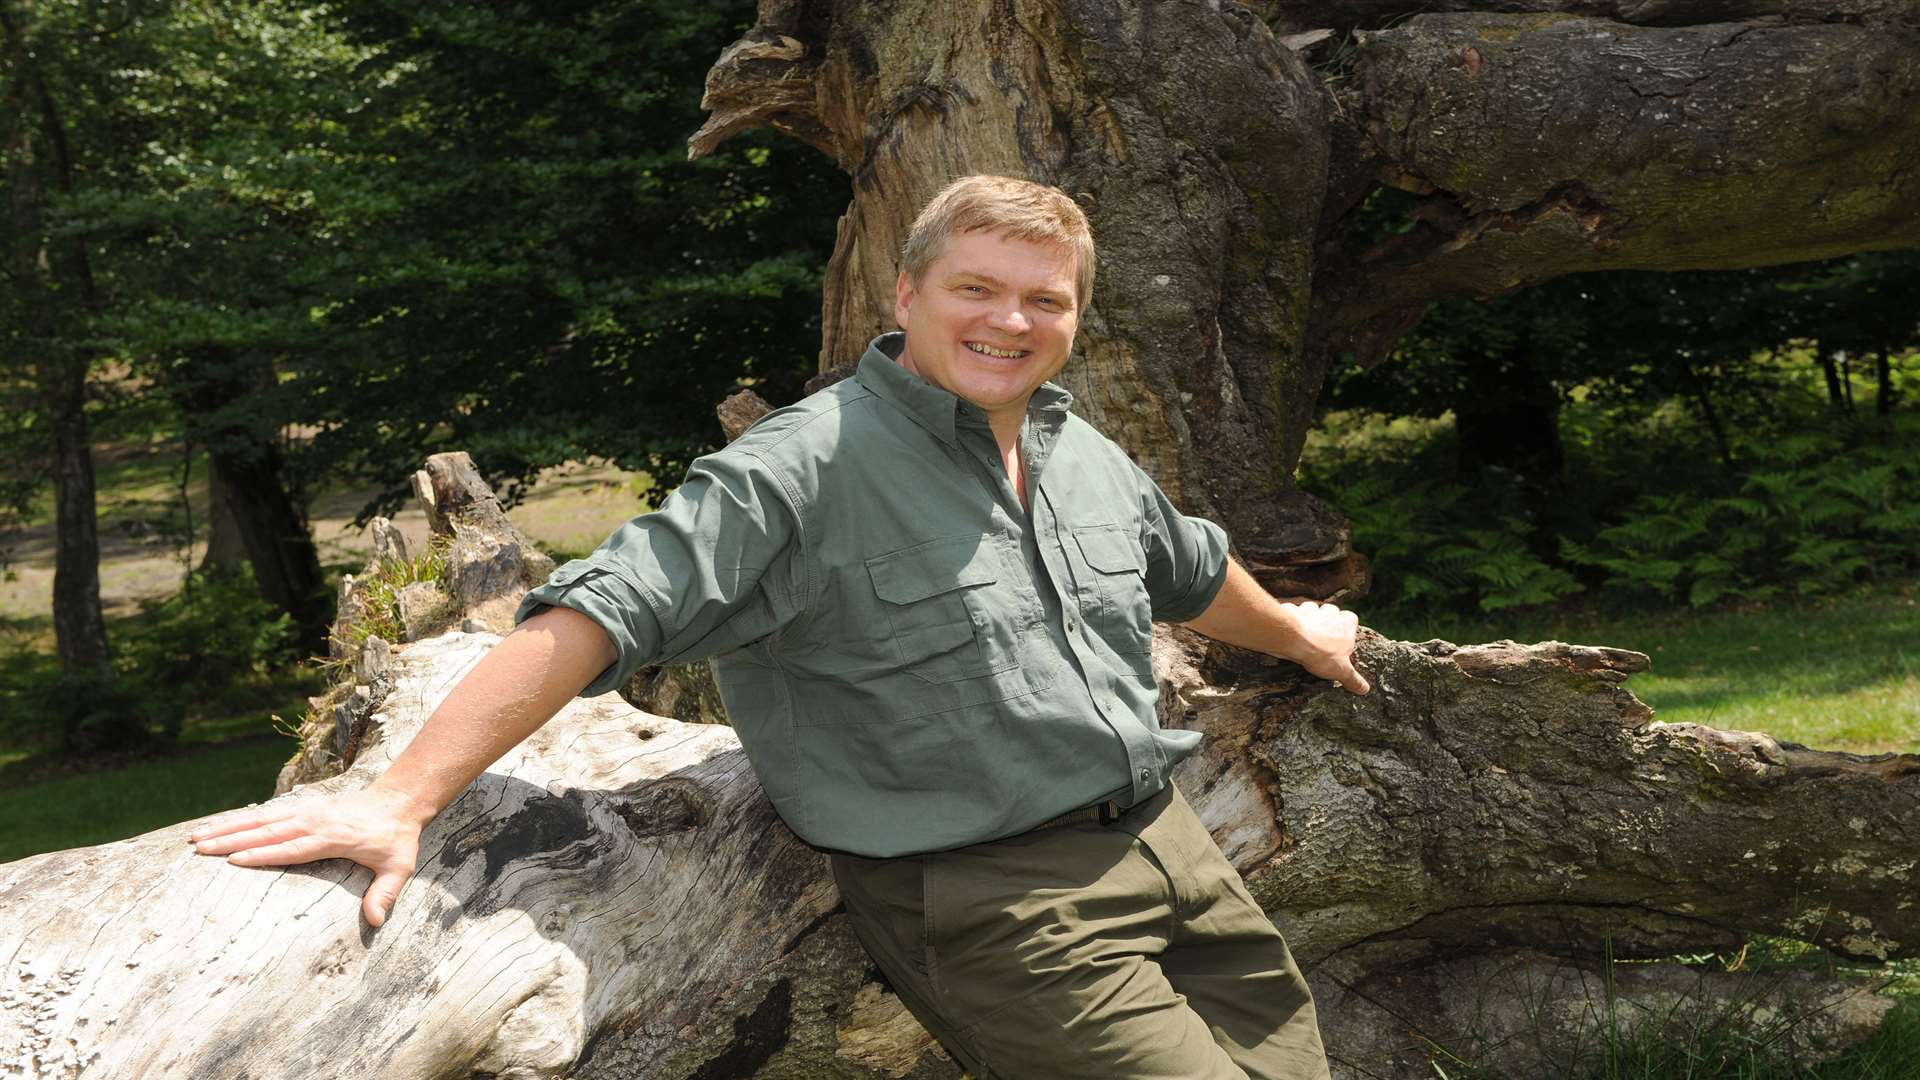 Ray Mears whose show will be at the Orchard in Dartford